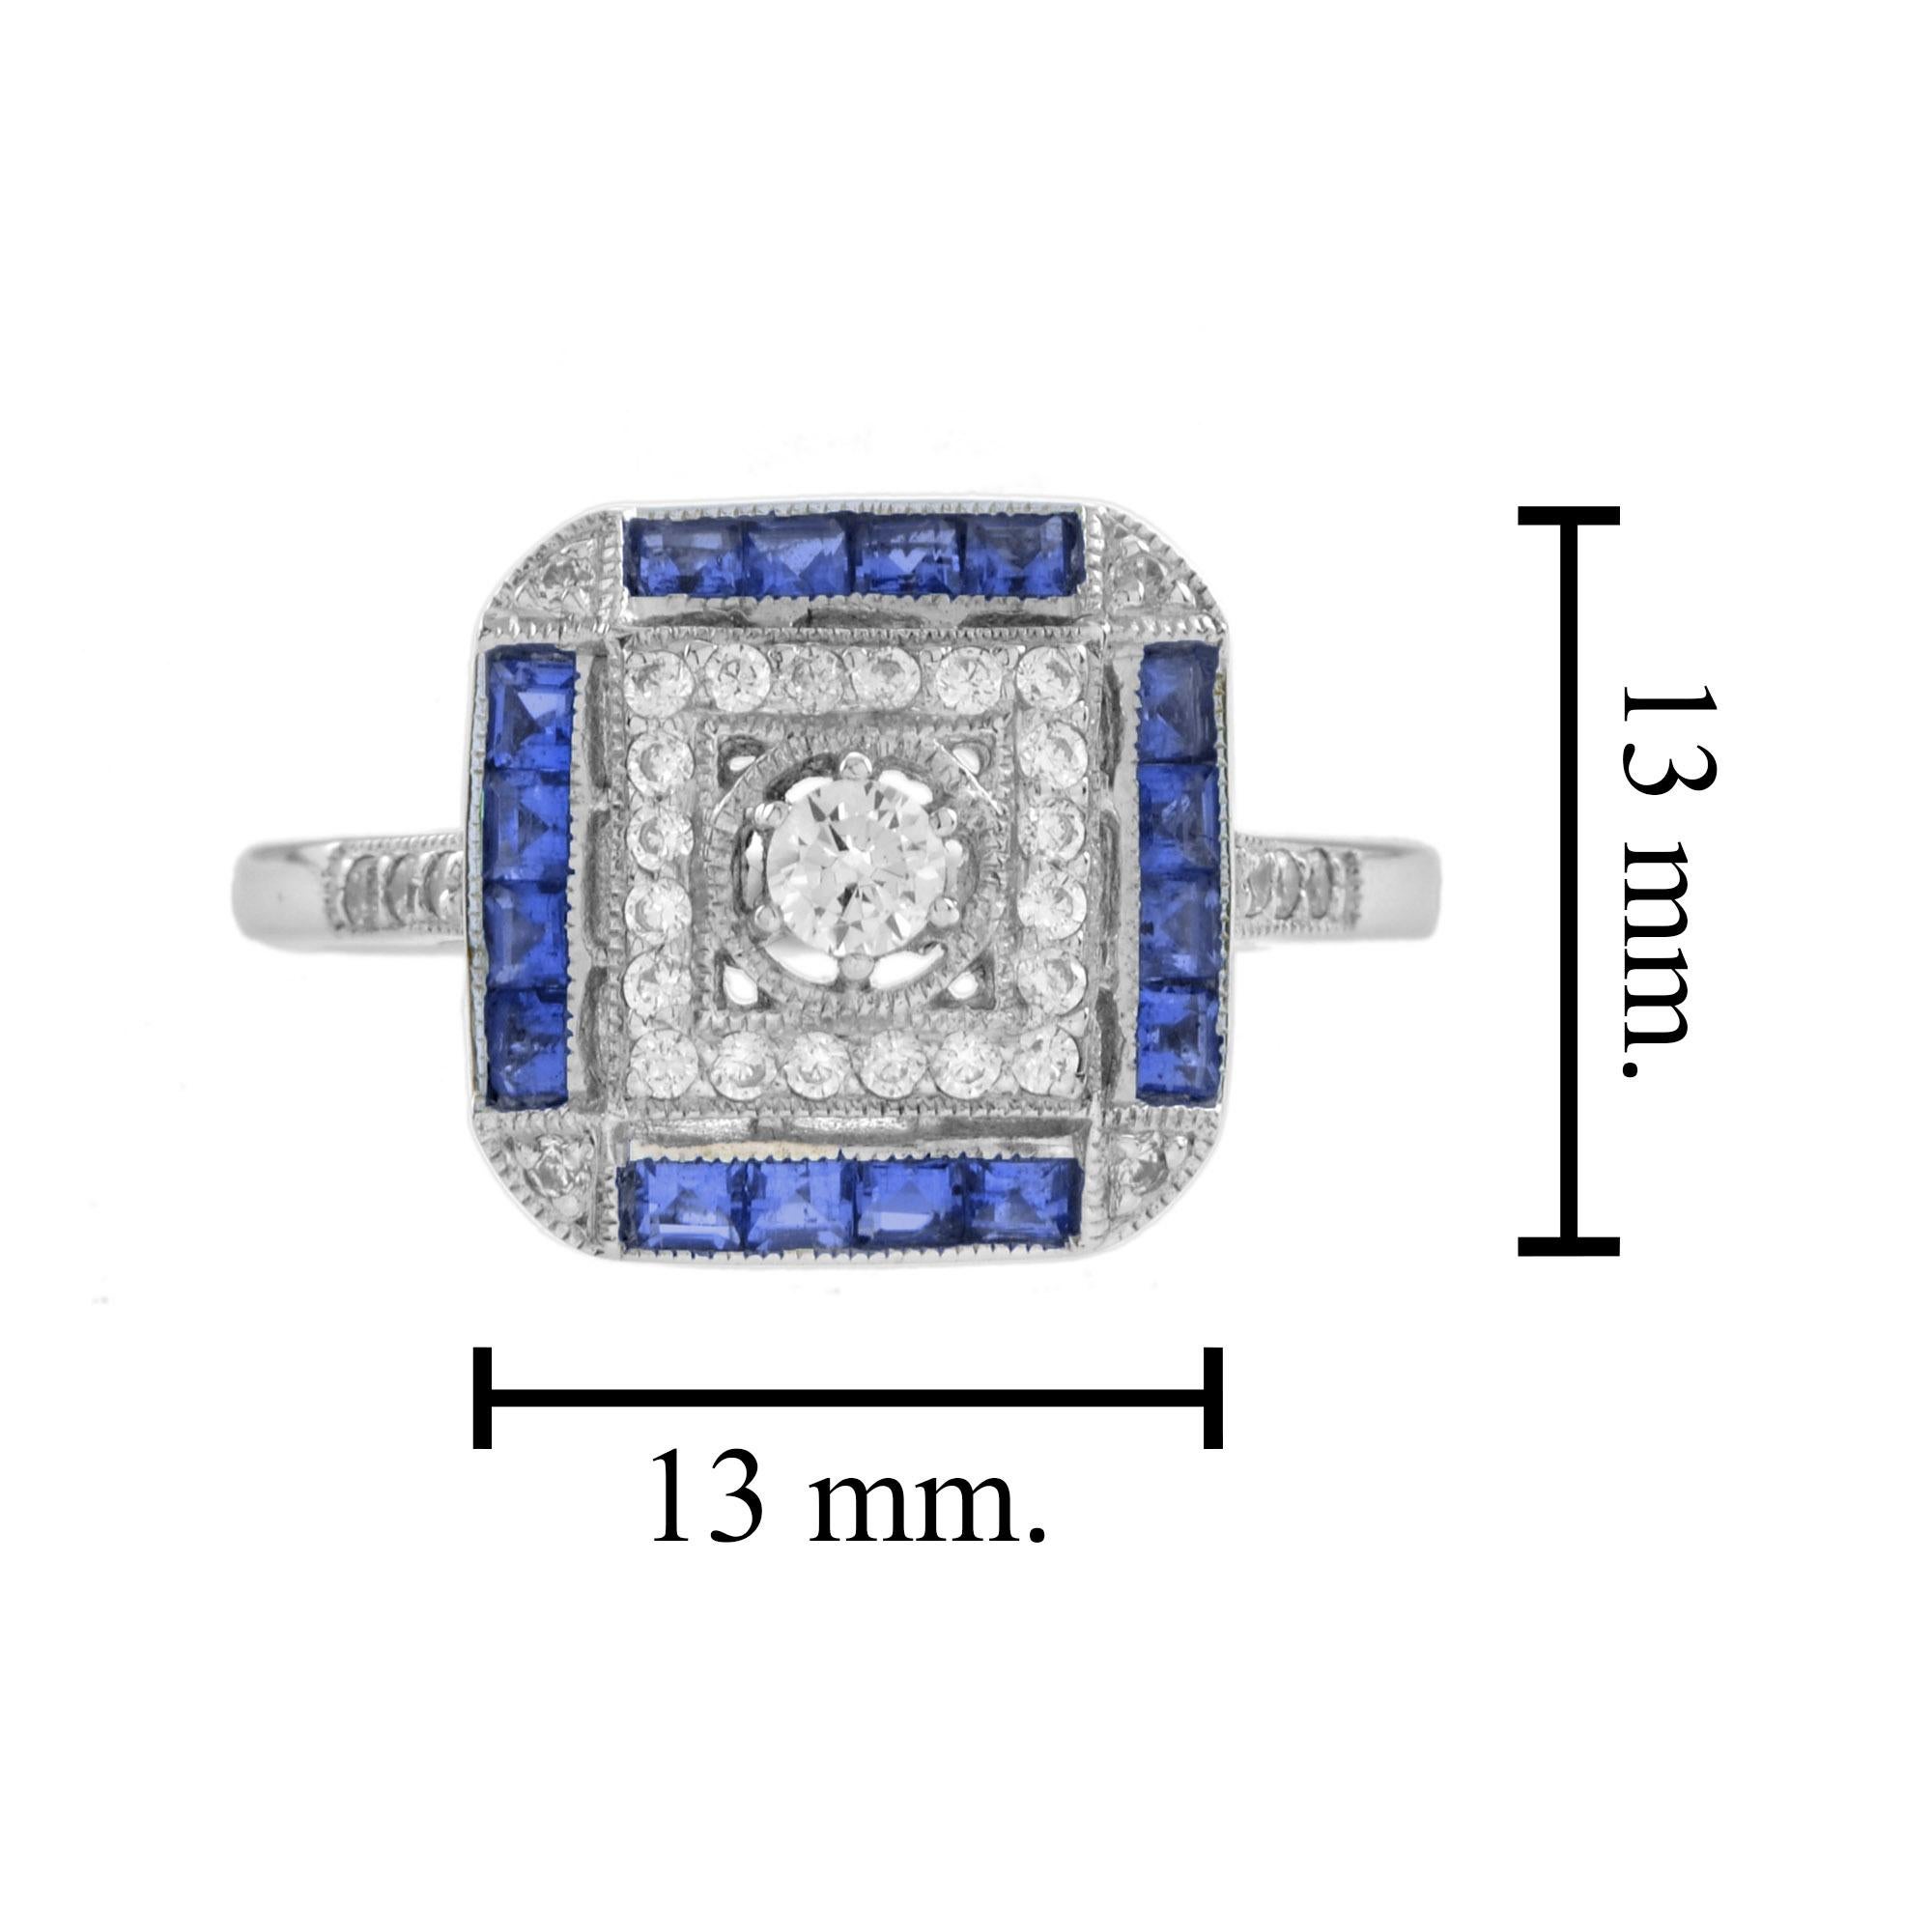 For Sale:  Diamond and Sapphire Art Deco Style Engagement Ring in 14K White Gold 6